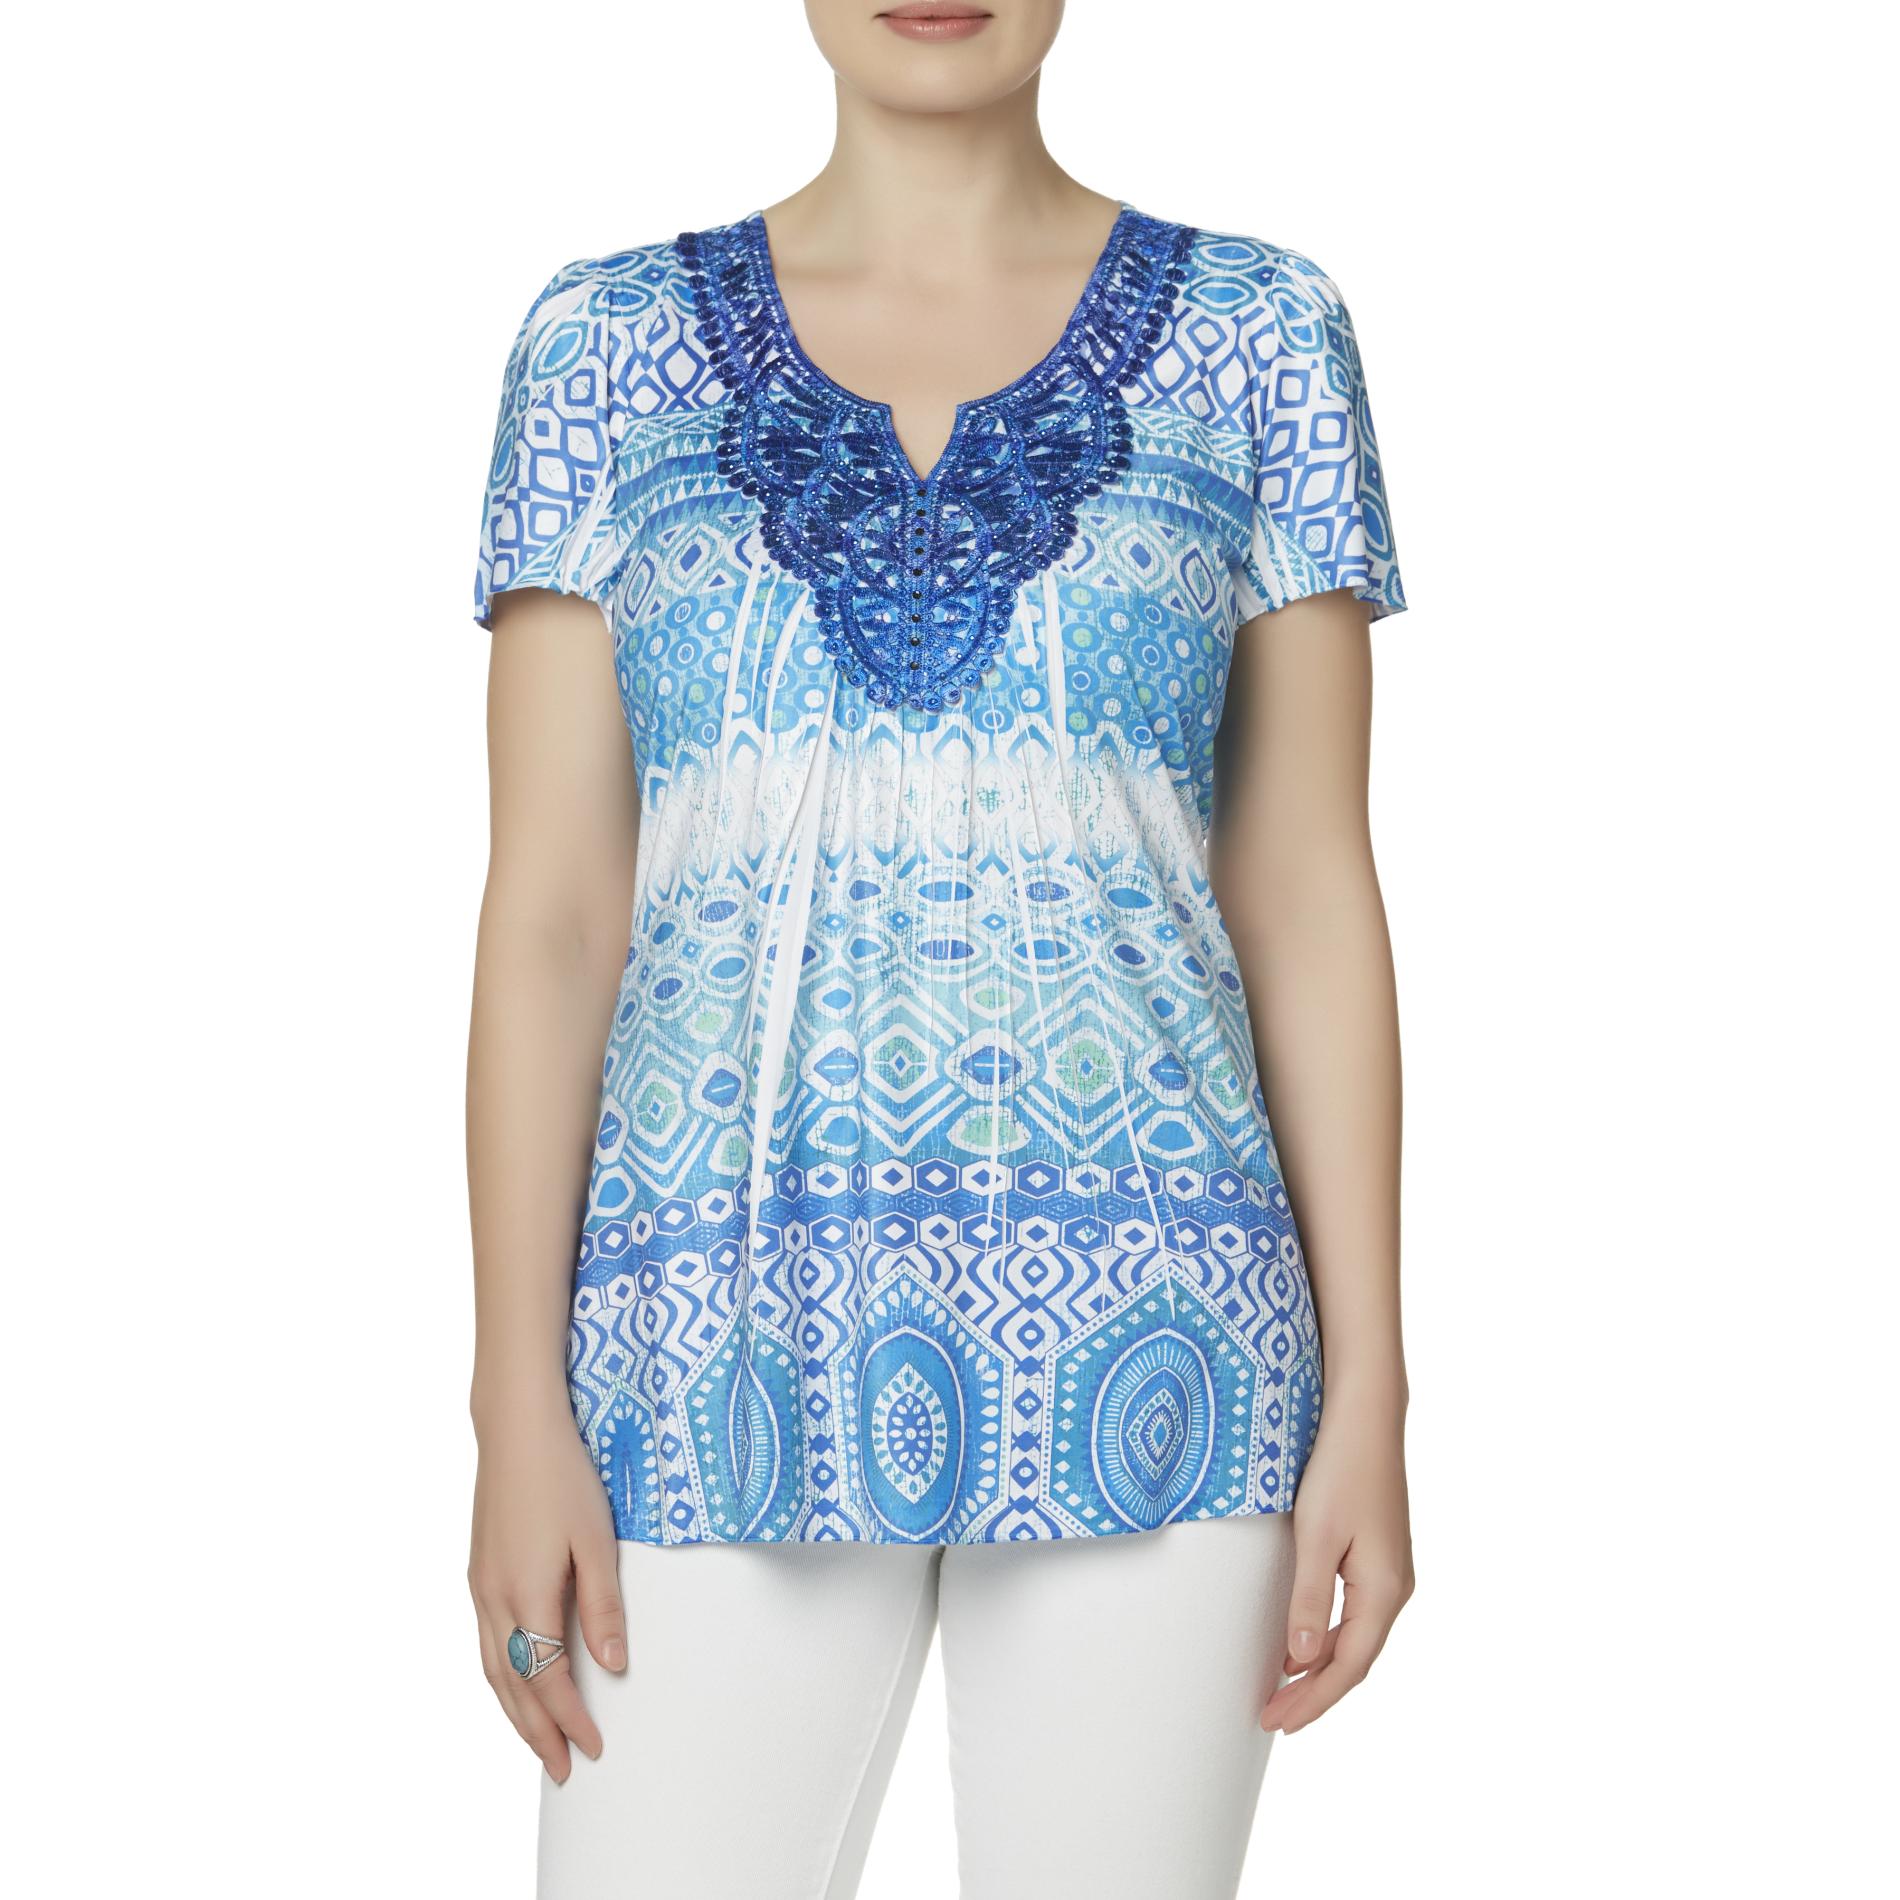 Women's Embellished Sublimation Top - Mixed Print